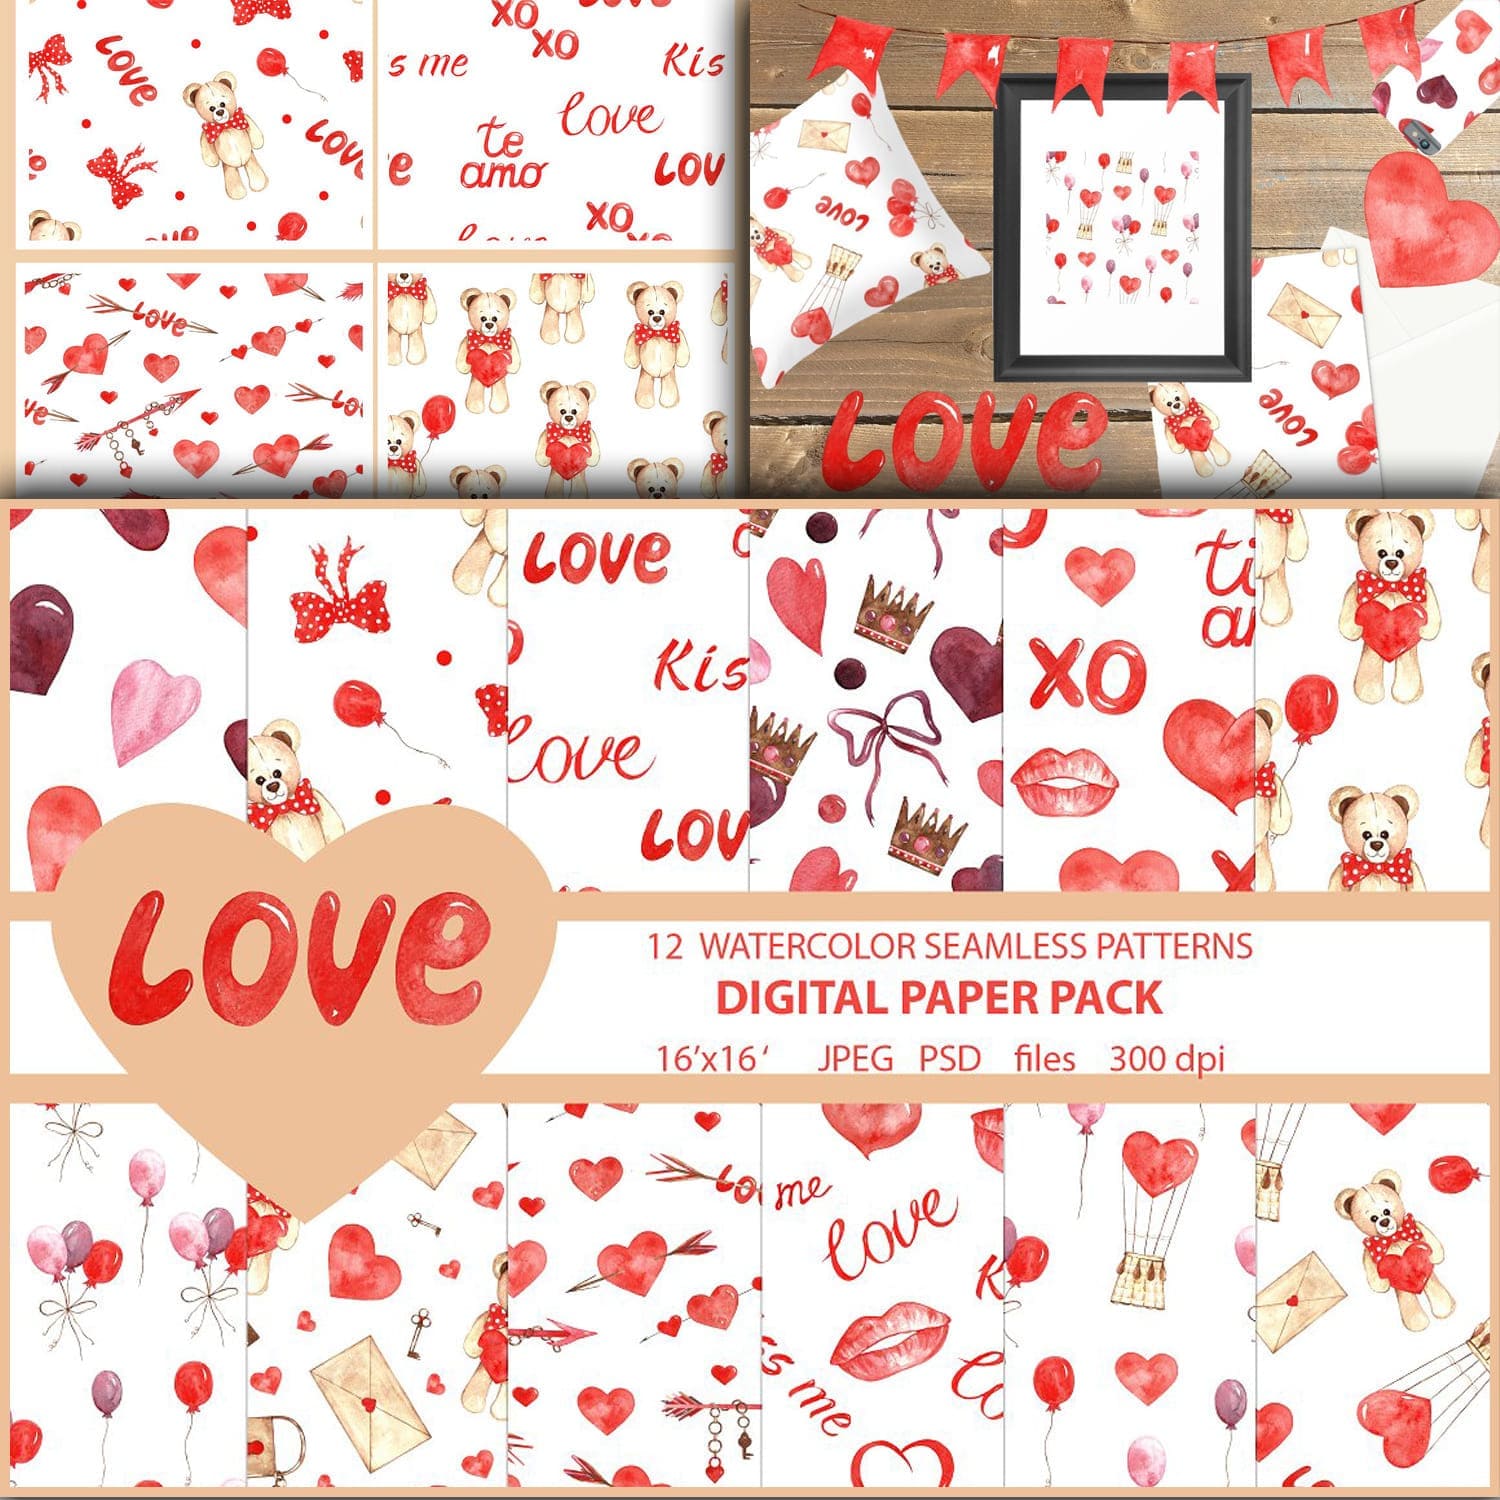 Watercolor seamless patterns about love, second image 1500x1500.